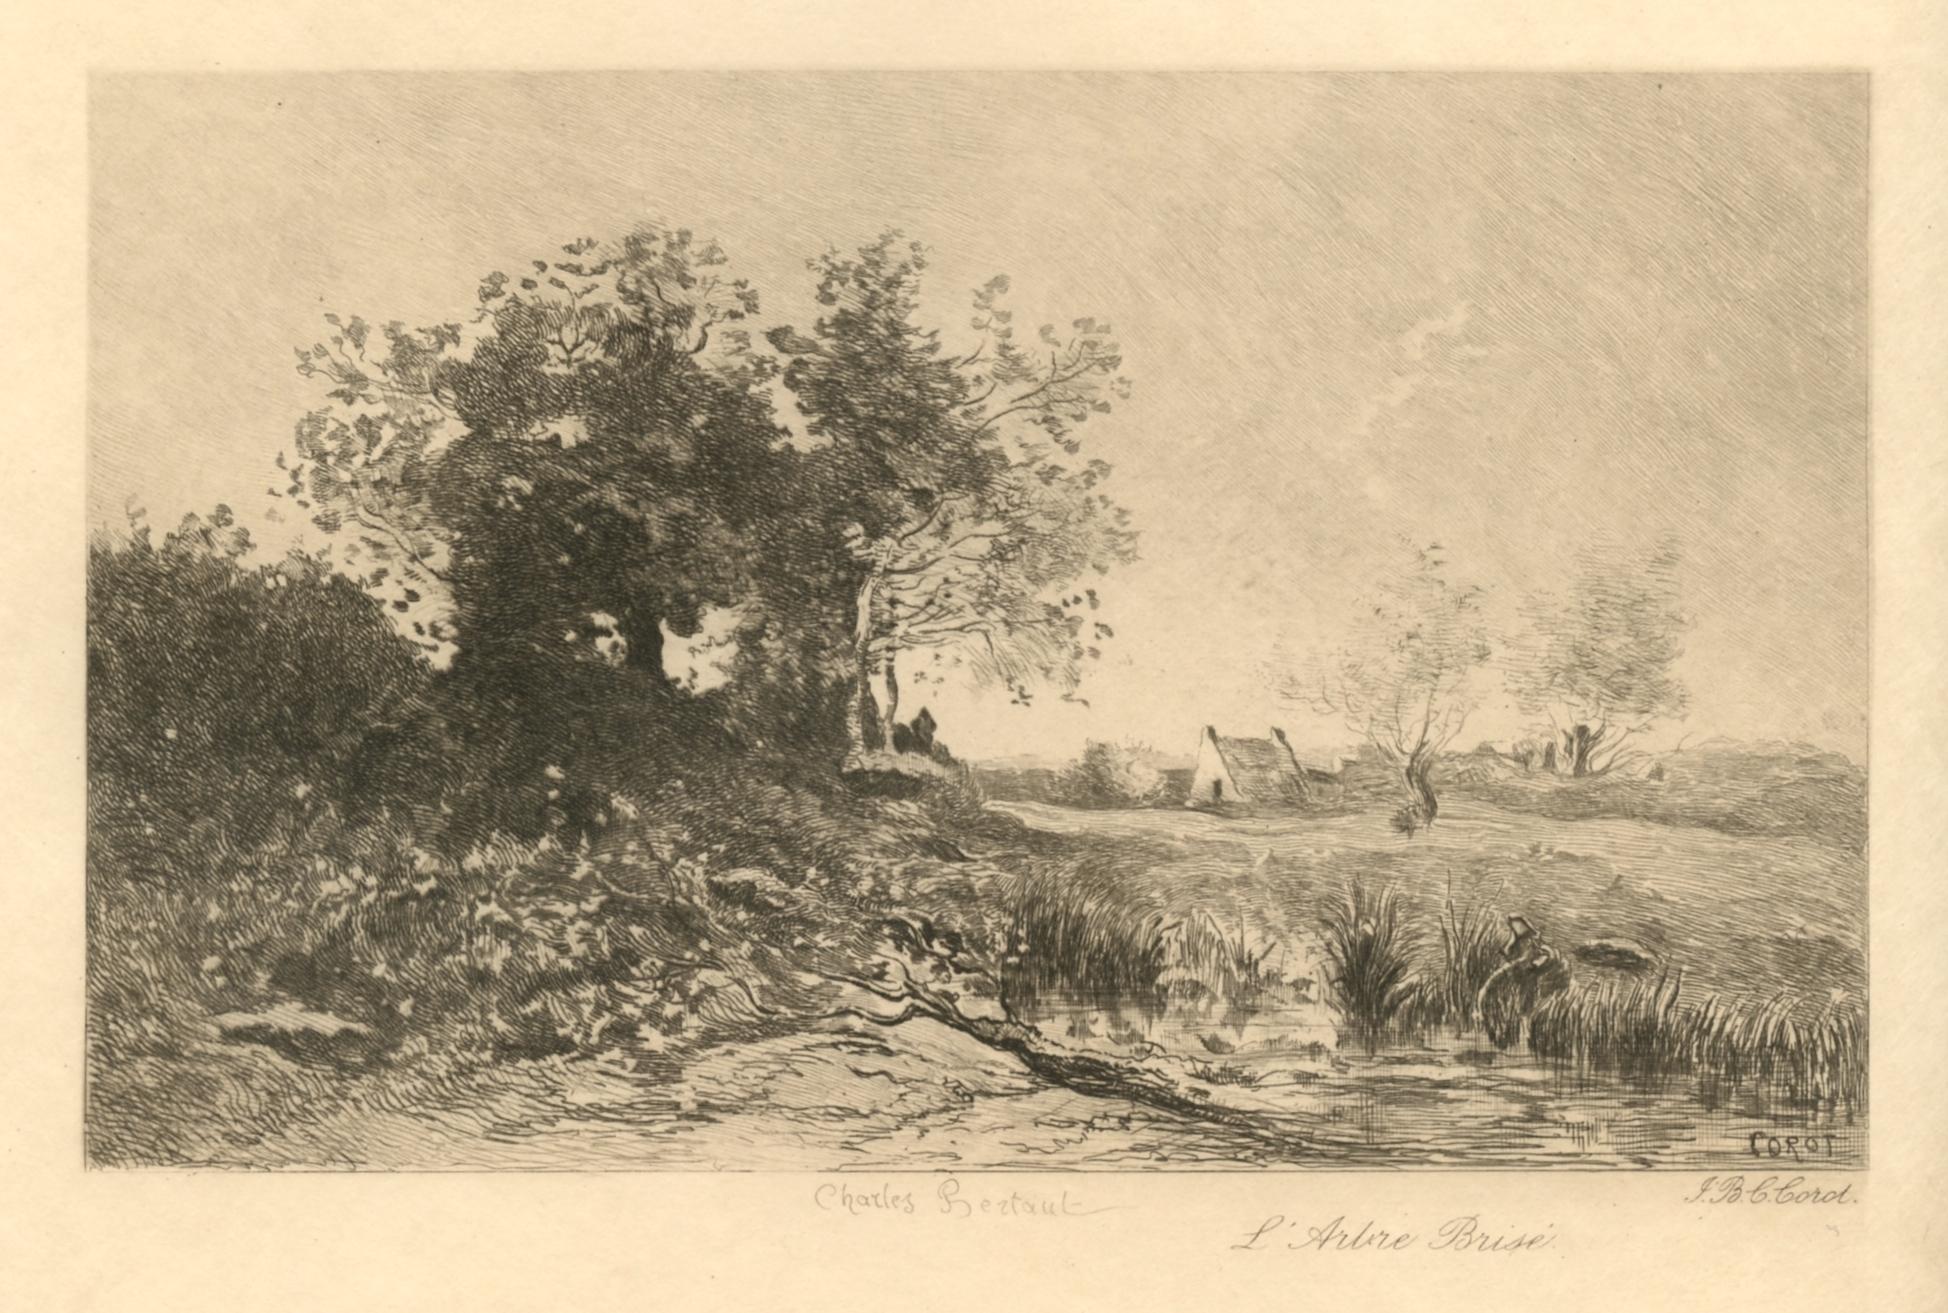 "L'Arbre Brise" etching - Print by (after) Jean-Baptiste-Camille Corot